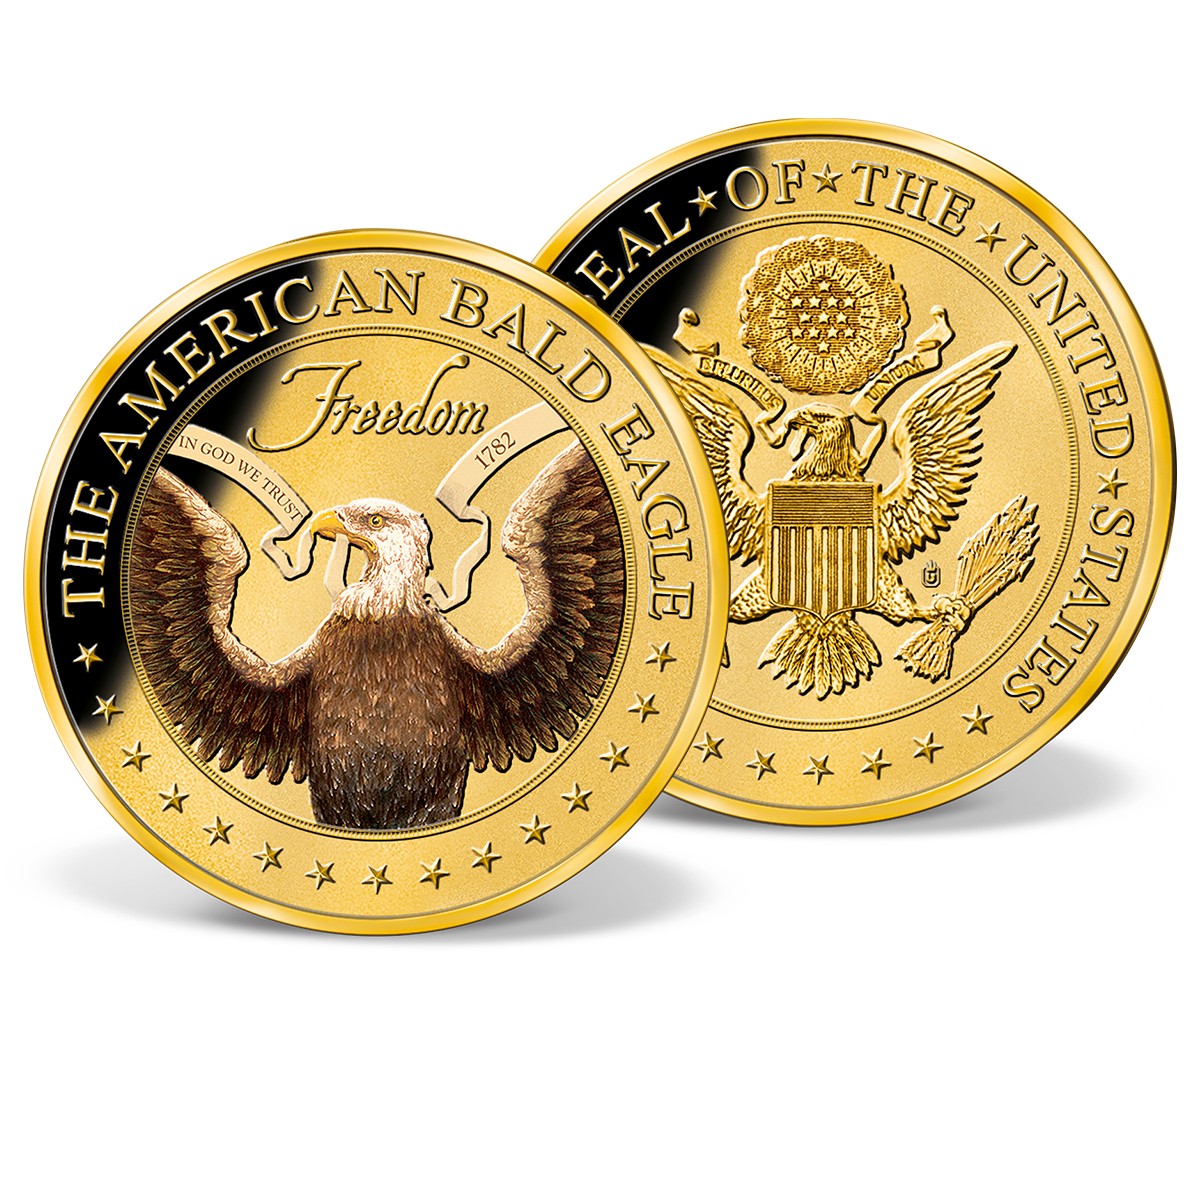 Freedom - Great Seal Commemorative Coin.